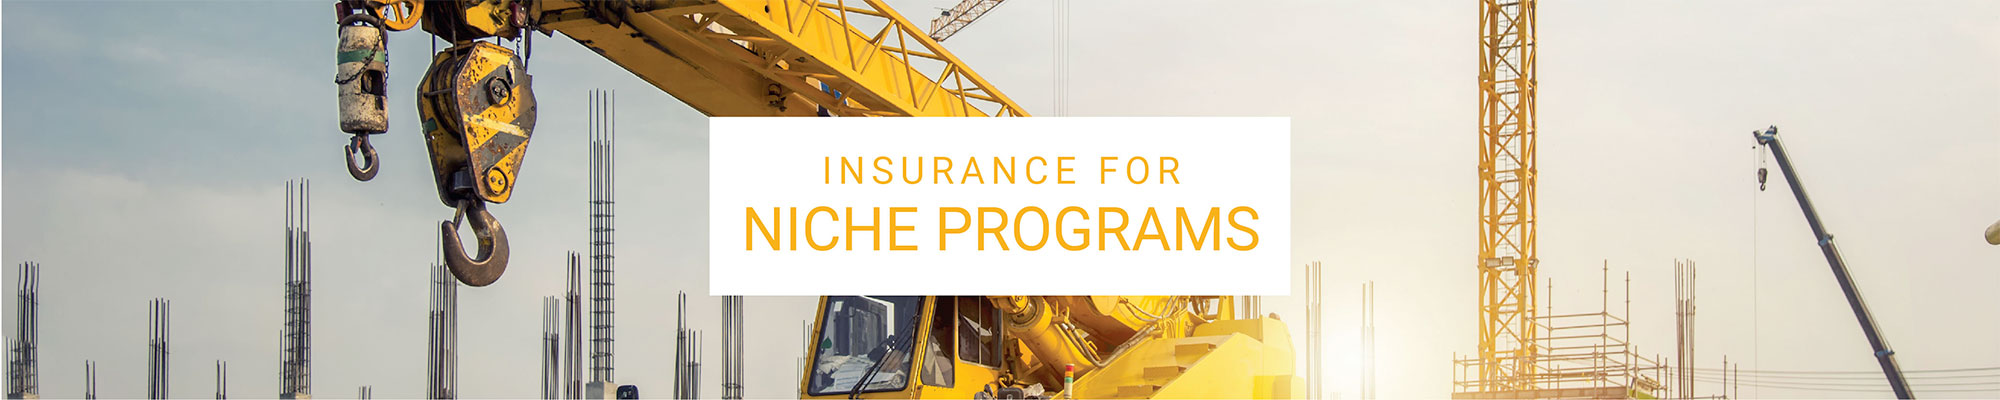 photo of cranes with text 'Insurance for Niche Programs'